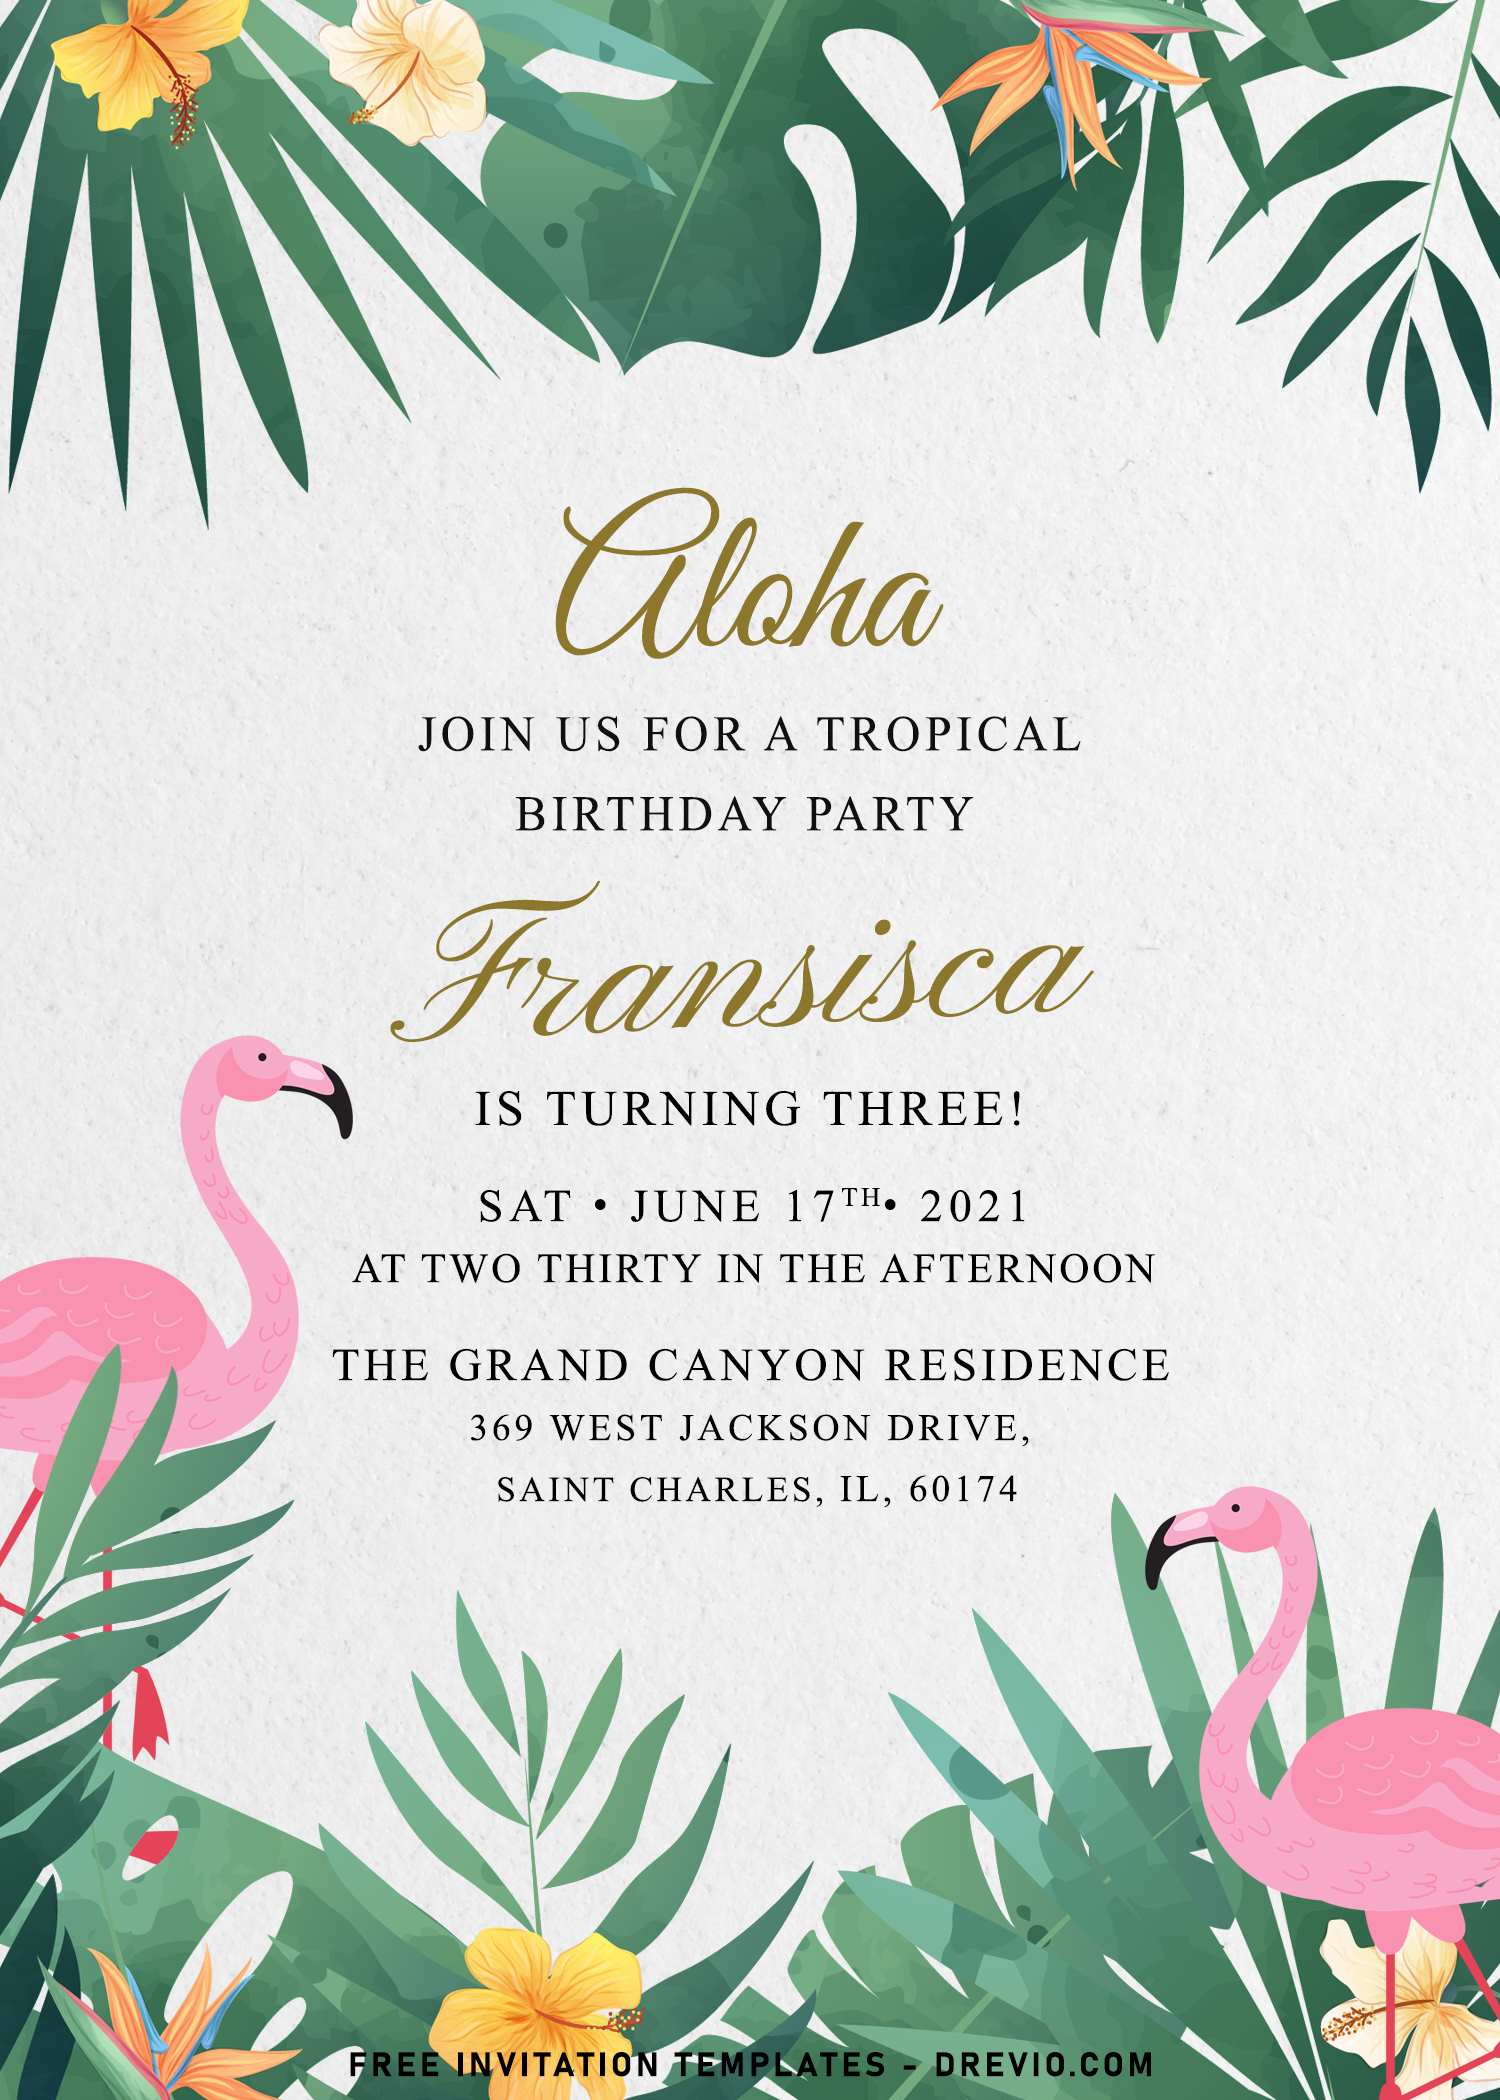 7 Flamingo Birthday Invitation Templates For Your Kid S Tropical Summer Birthday Party Download Hundreds Free Printable Birthday Invitation Templates